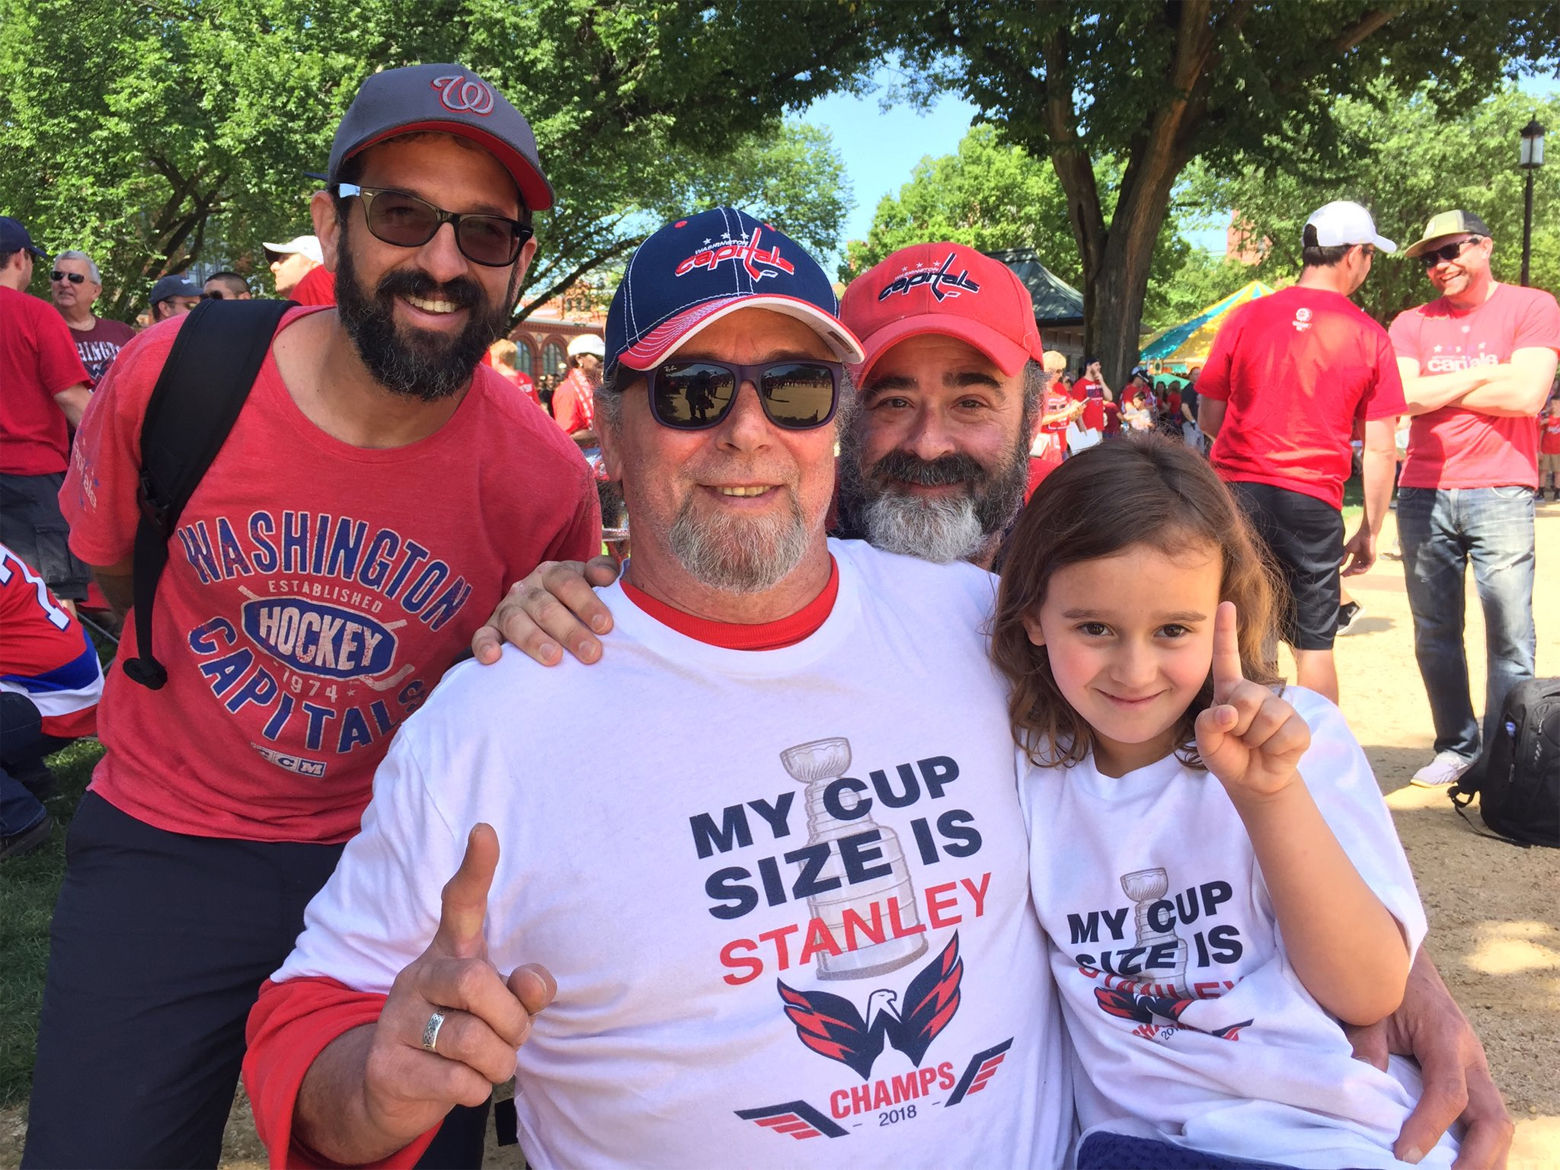 Rich, Adrian, Steve and Selene were on hand to celebrate the Capitals' victory. (WTOP/Kristi King)